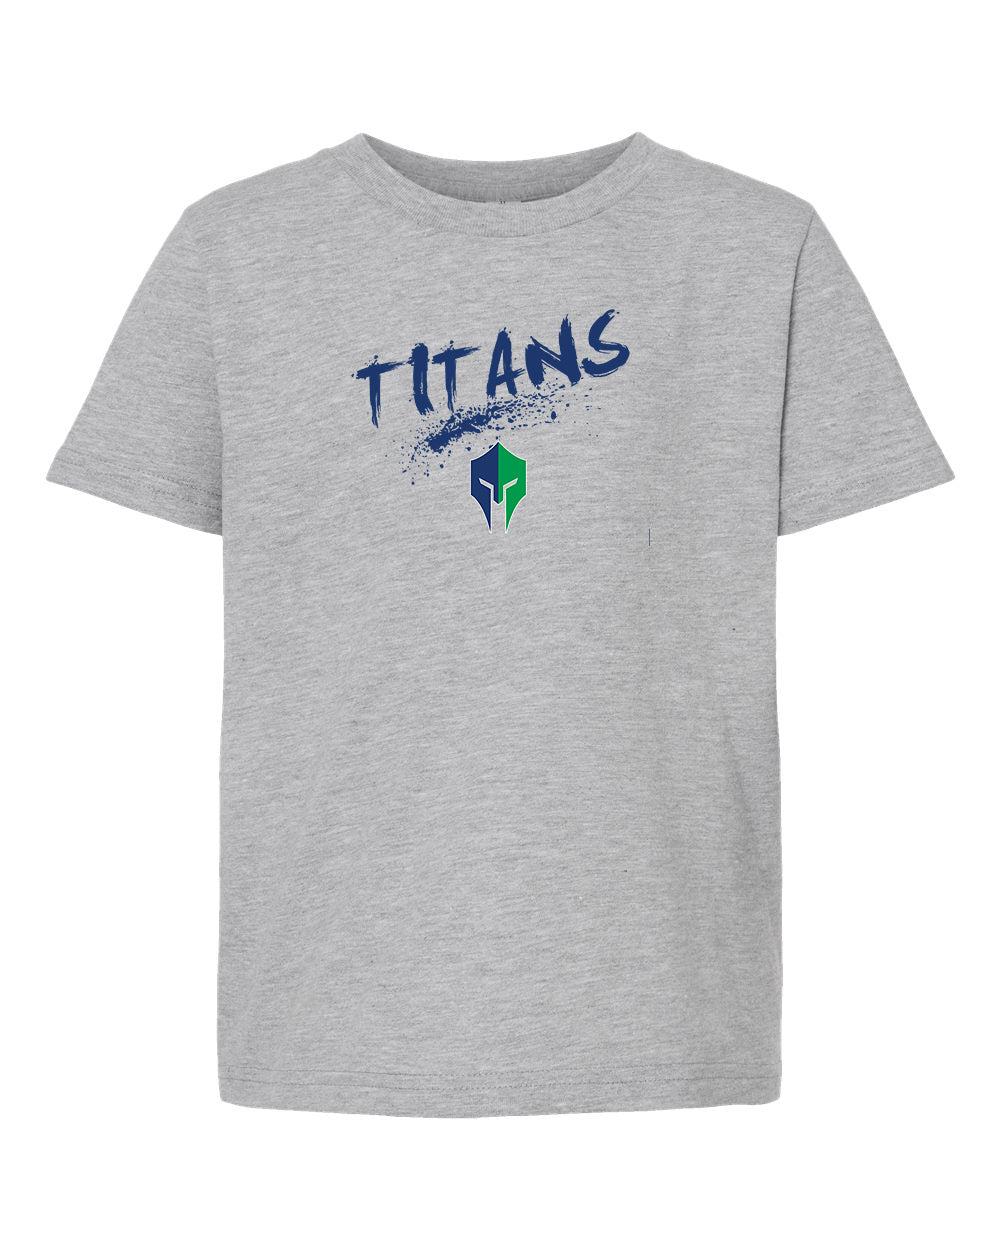 Titans Youth Jersey Tee "300" - 235 (color options available)